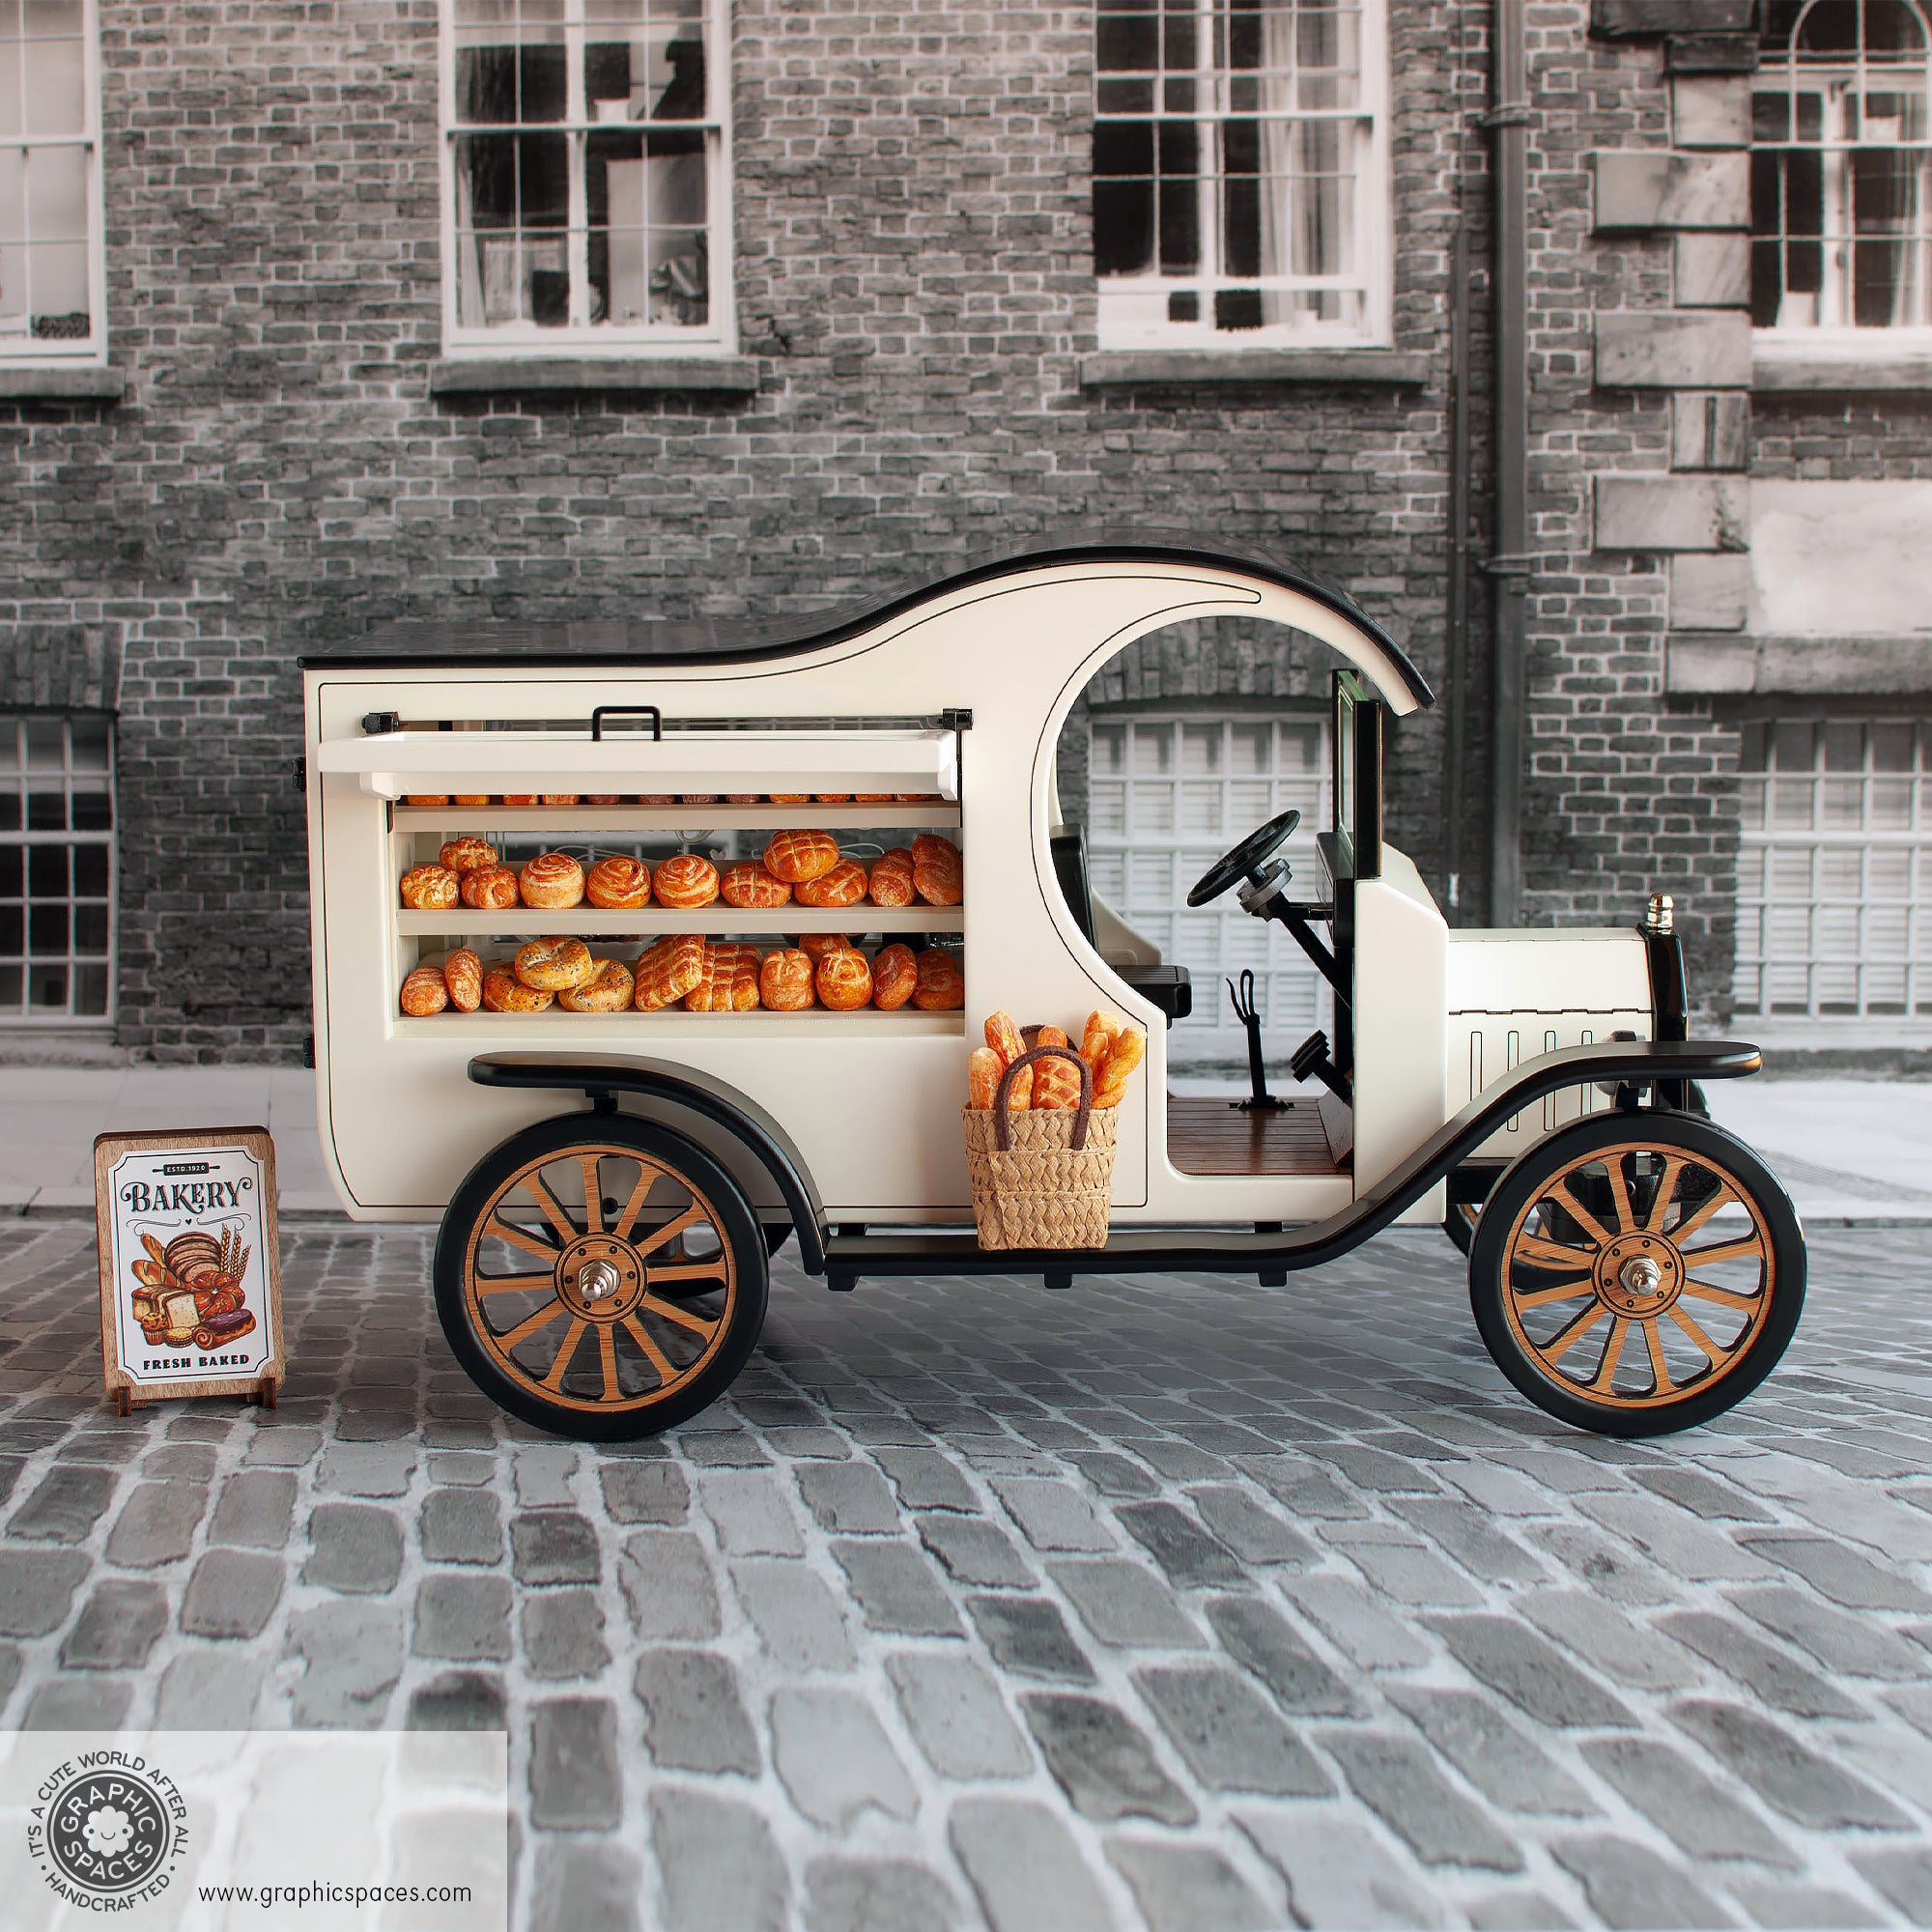 1:12 Scale Room Box White Bakery Shop Truck Model T C Cab. Passenger side view. Closed window showing  freshly baked breads.